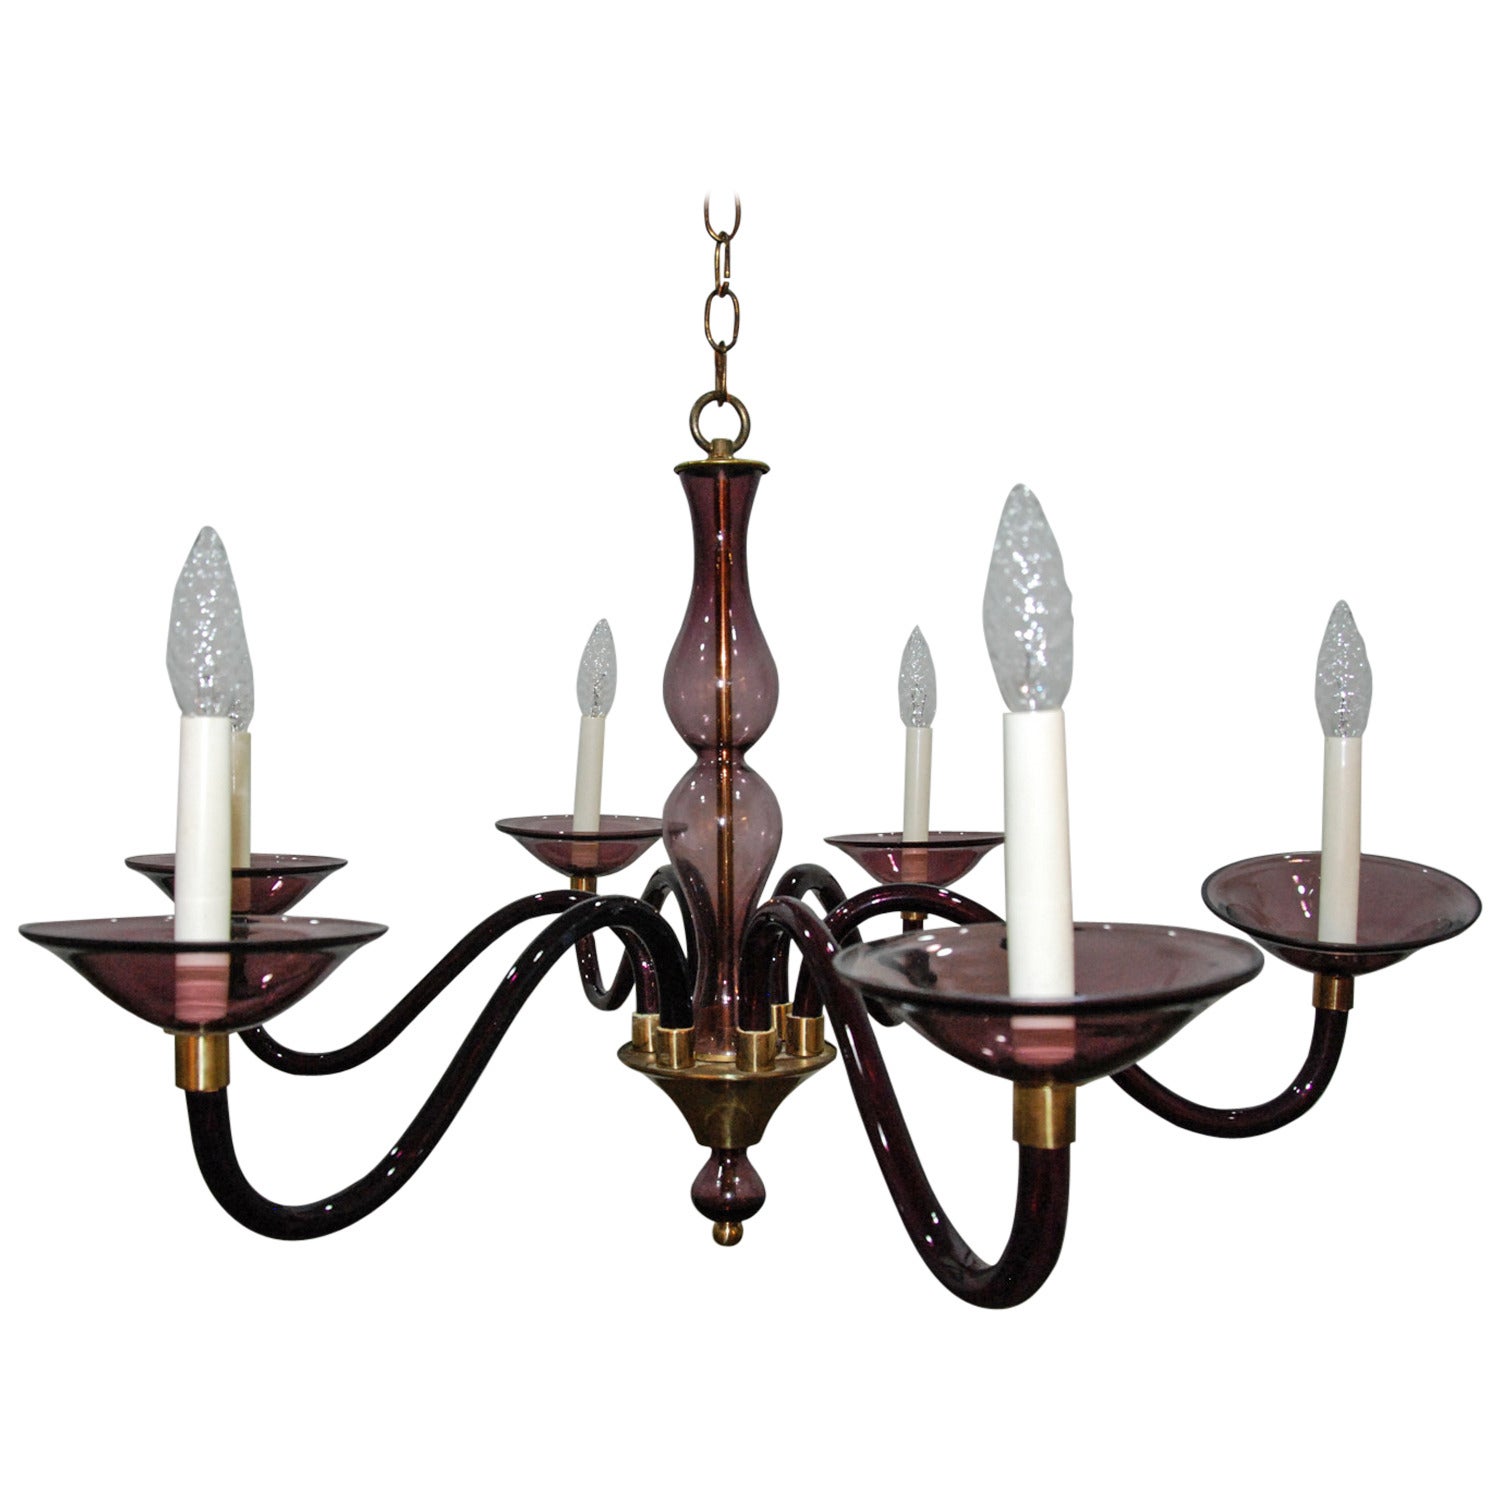 Purple Murano Glass and Brass Chandelier in the Style of Pauly and Cie, 1950s For Sale